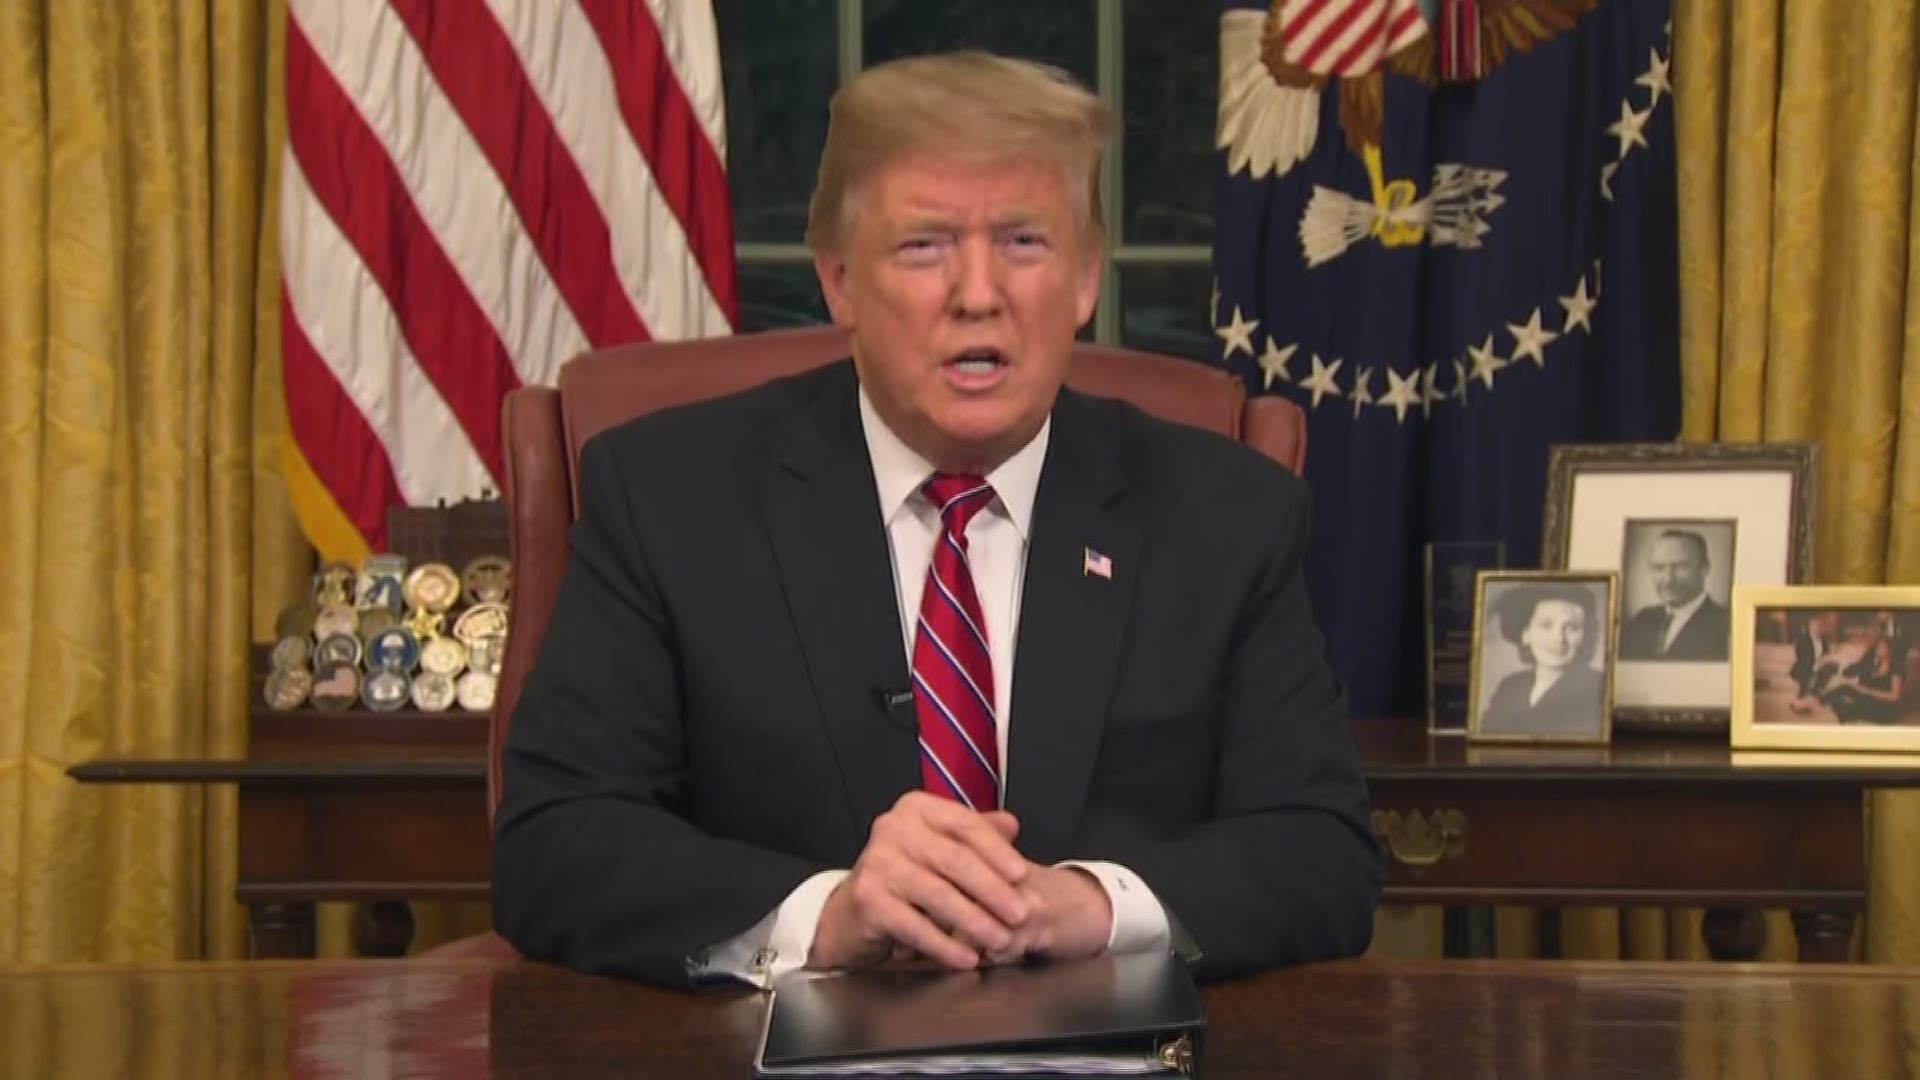 Trump argues in a prime-time address that a 'crisis' at the U.S.-Mexico border requires the wall he's demanding before ending the partial government shutdown.